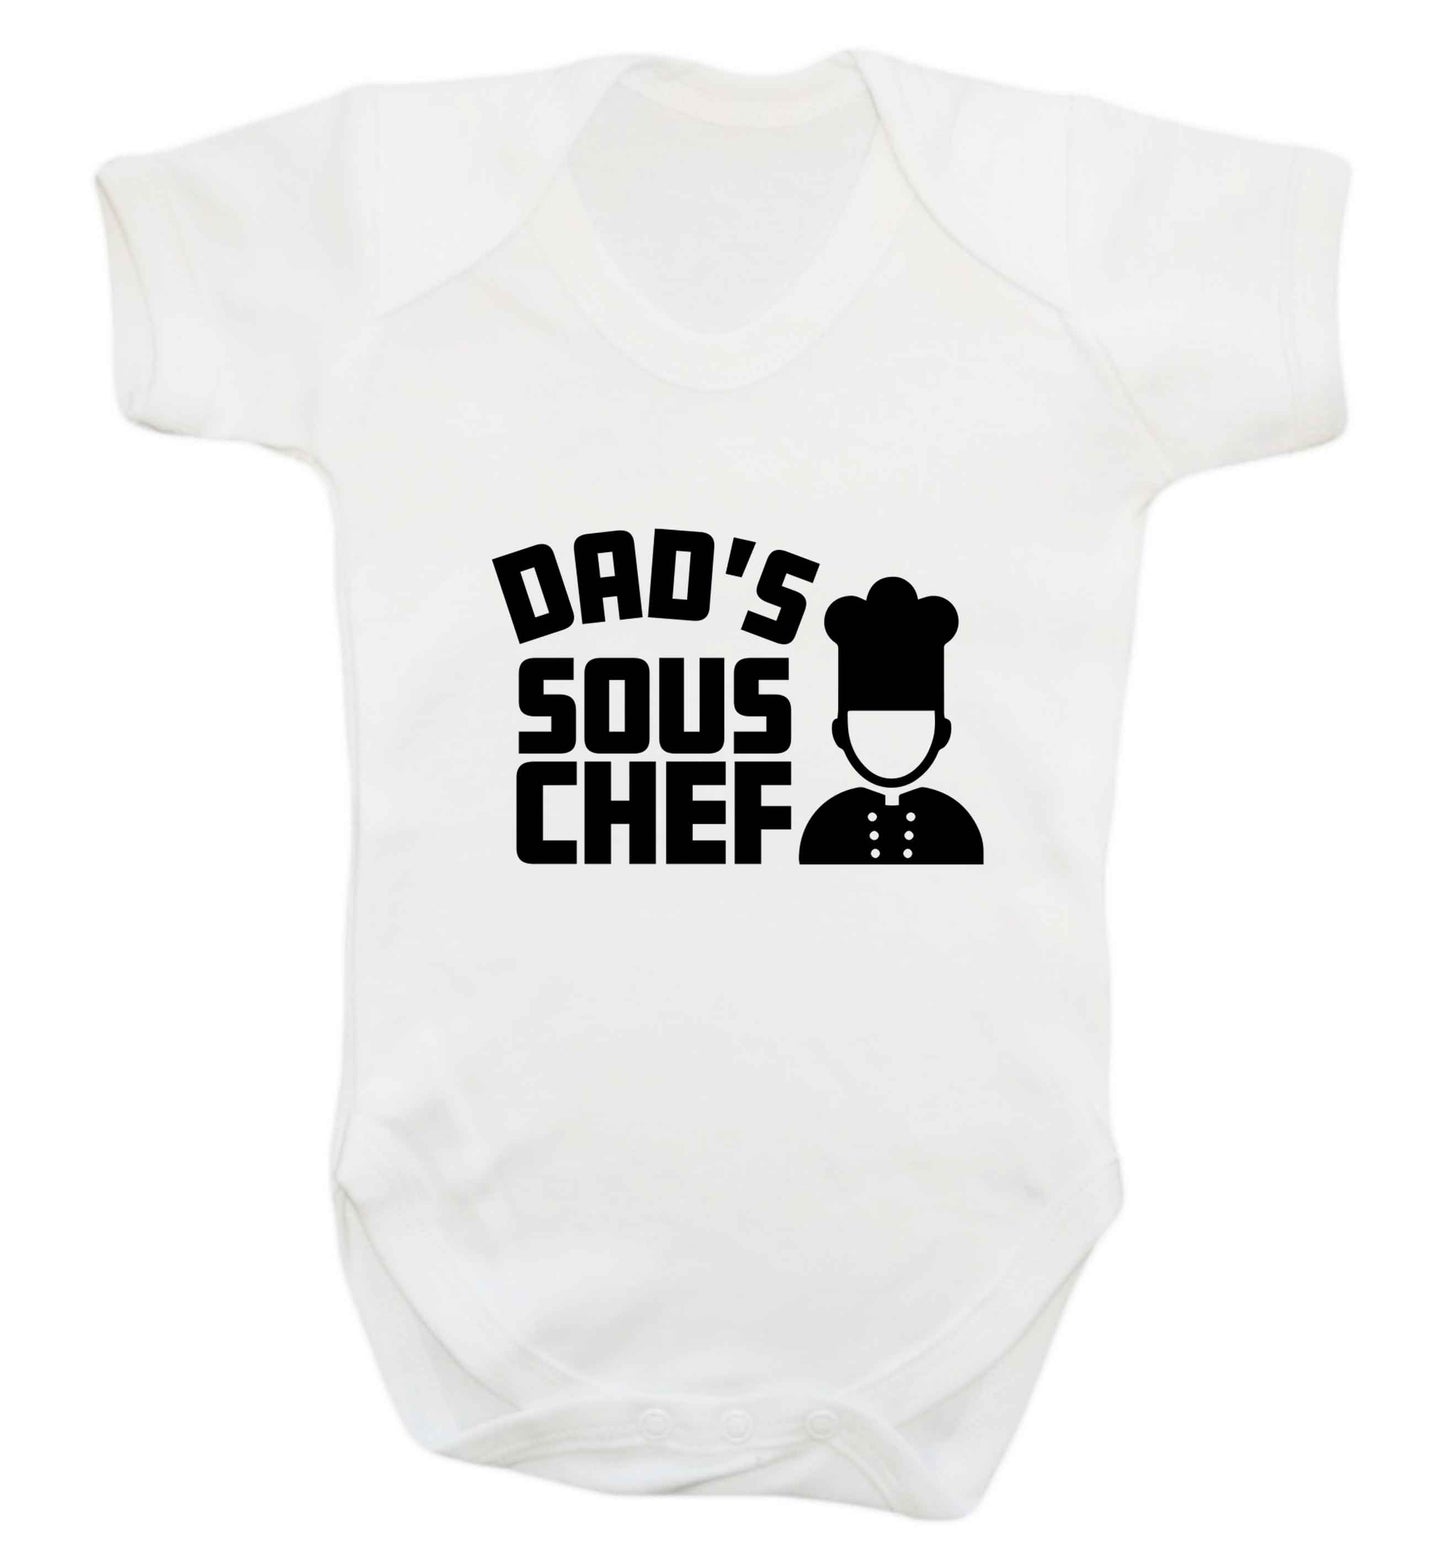 Dad's sous chef baby vest white 18-24 months